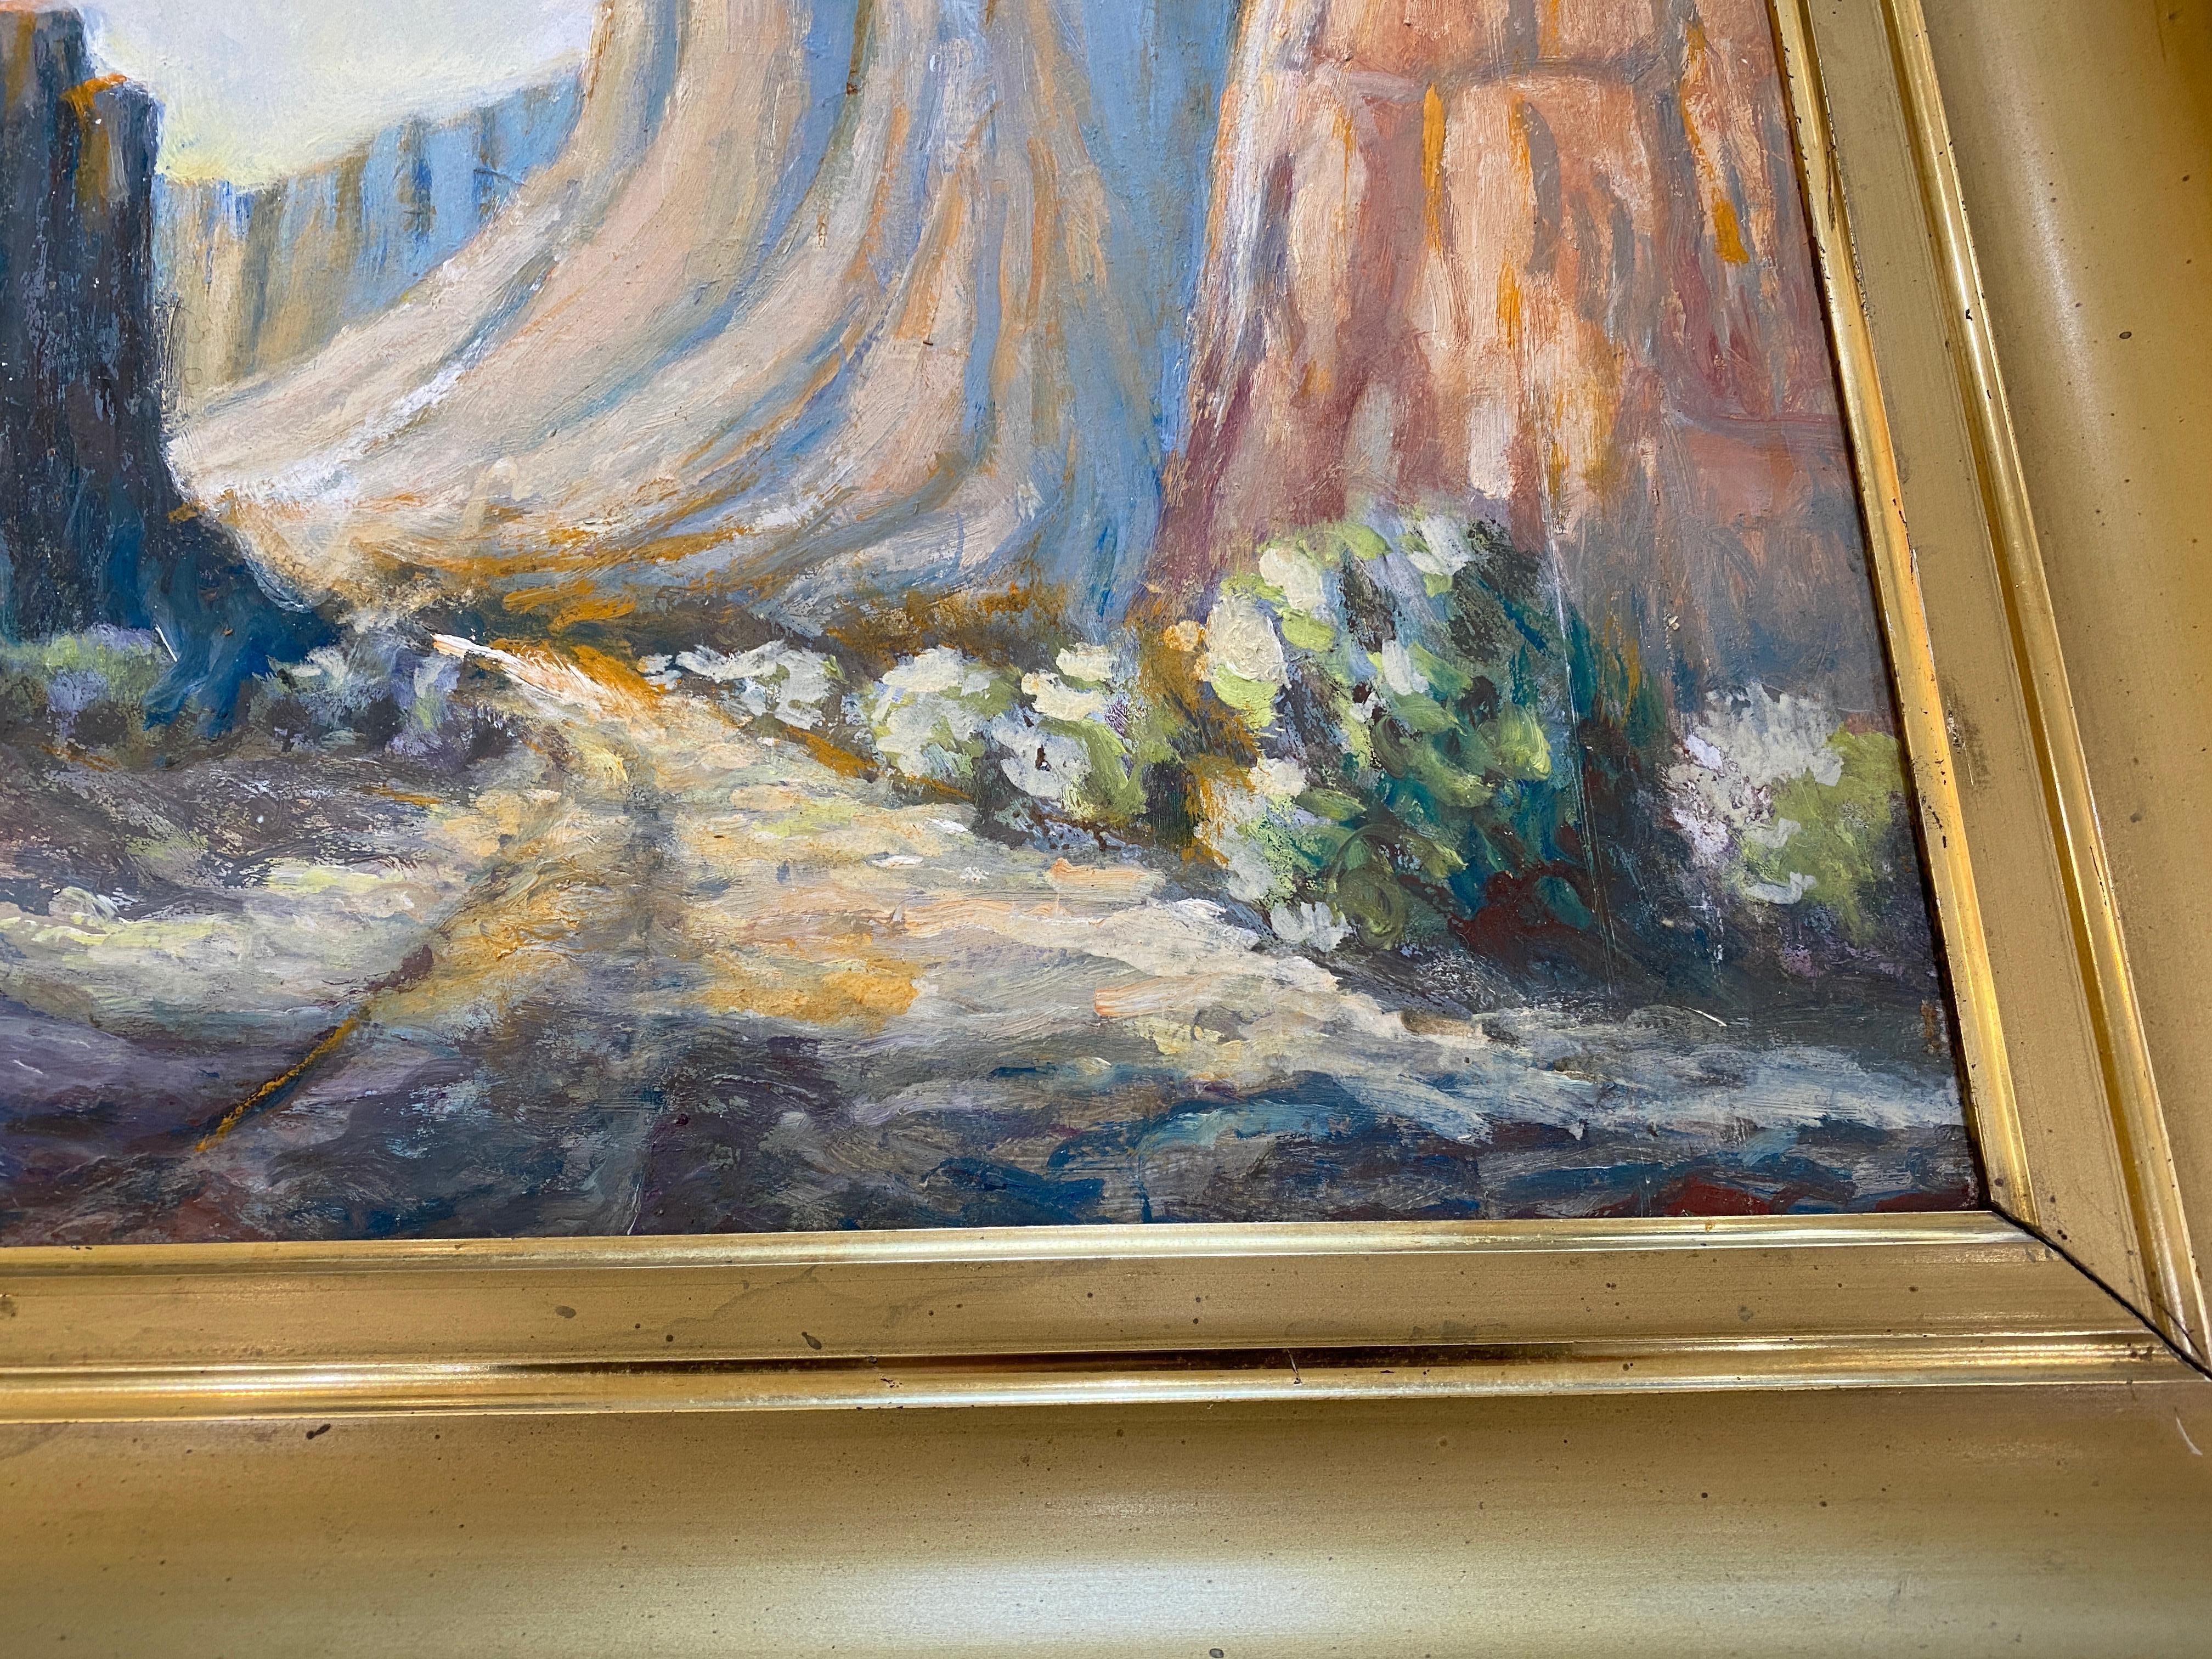 'Grand Canyon, ' by Stephen A. Douglas, Oil on Board Painting 2